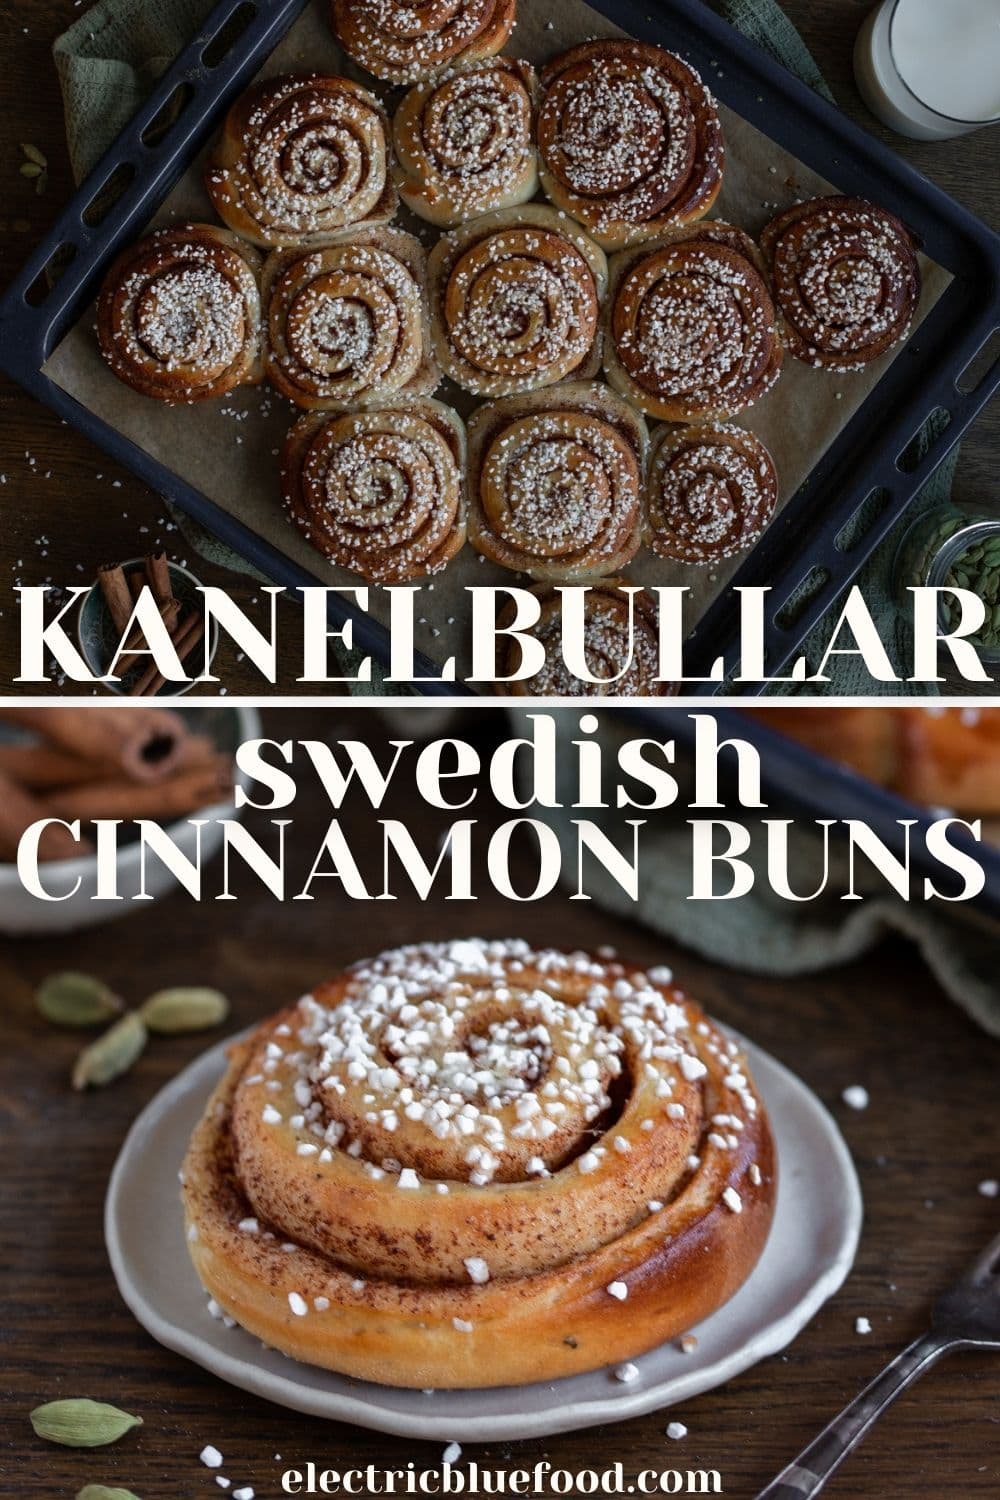 How to make Kanelbullar Swedish cinnamon buns. The best cinnamon roll recipe from Sweden, with cinnamon, cardamom and pearl sugar topping.